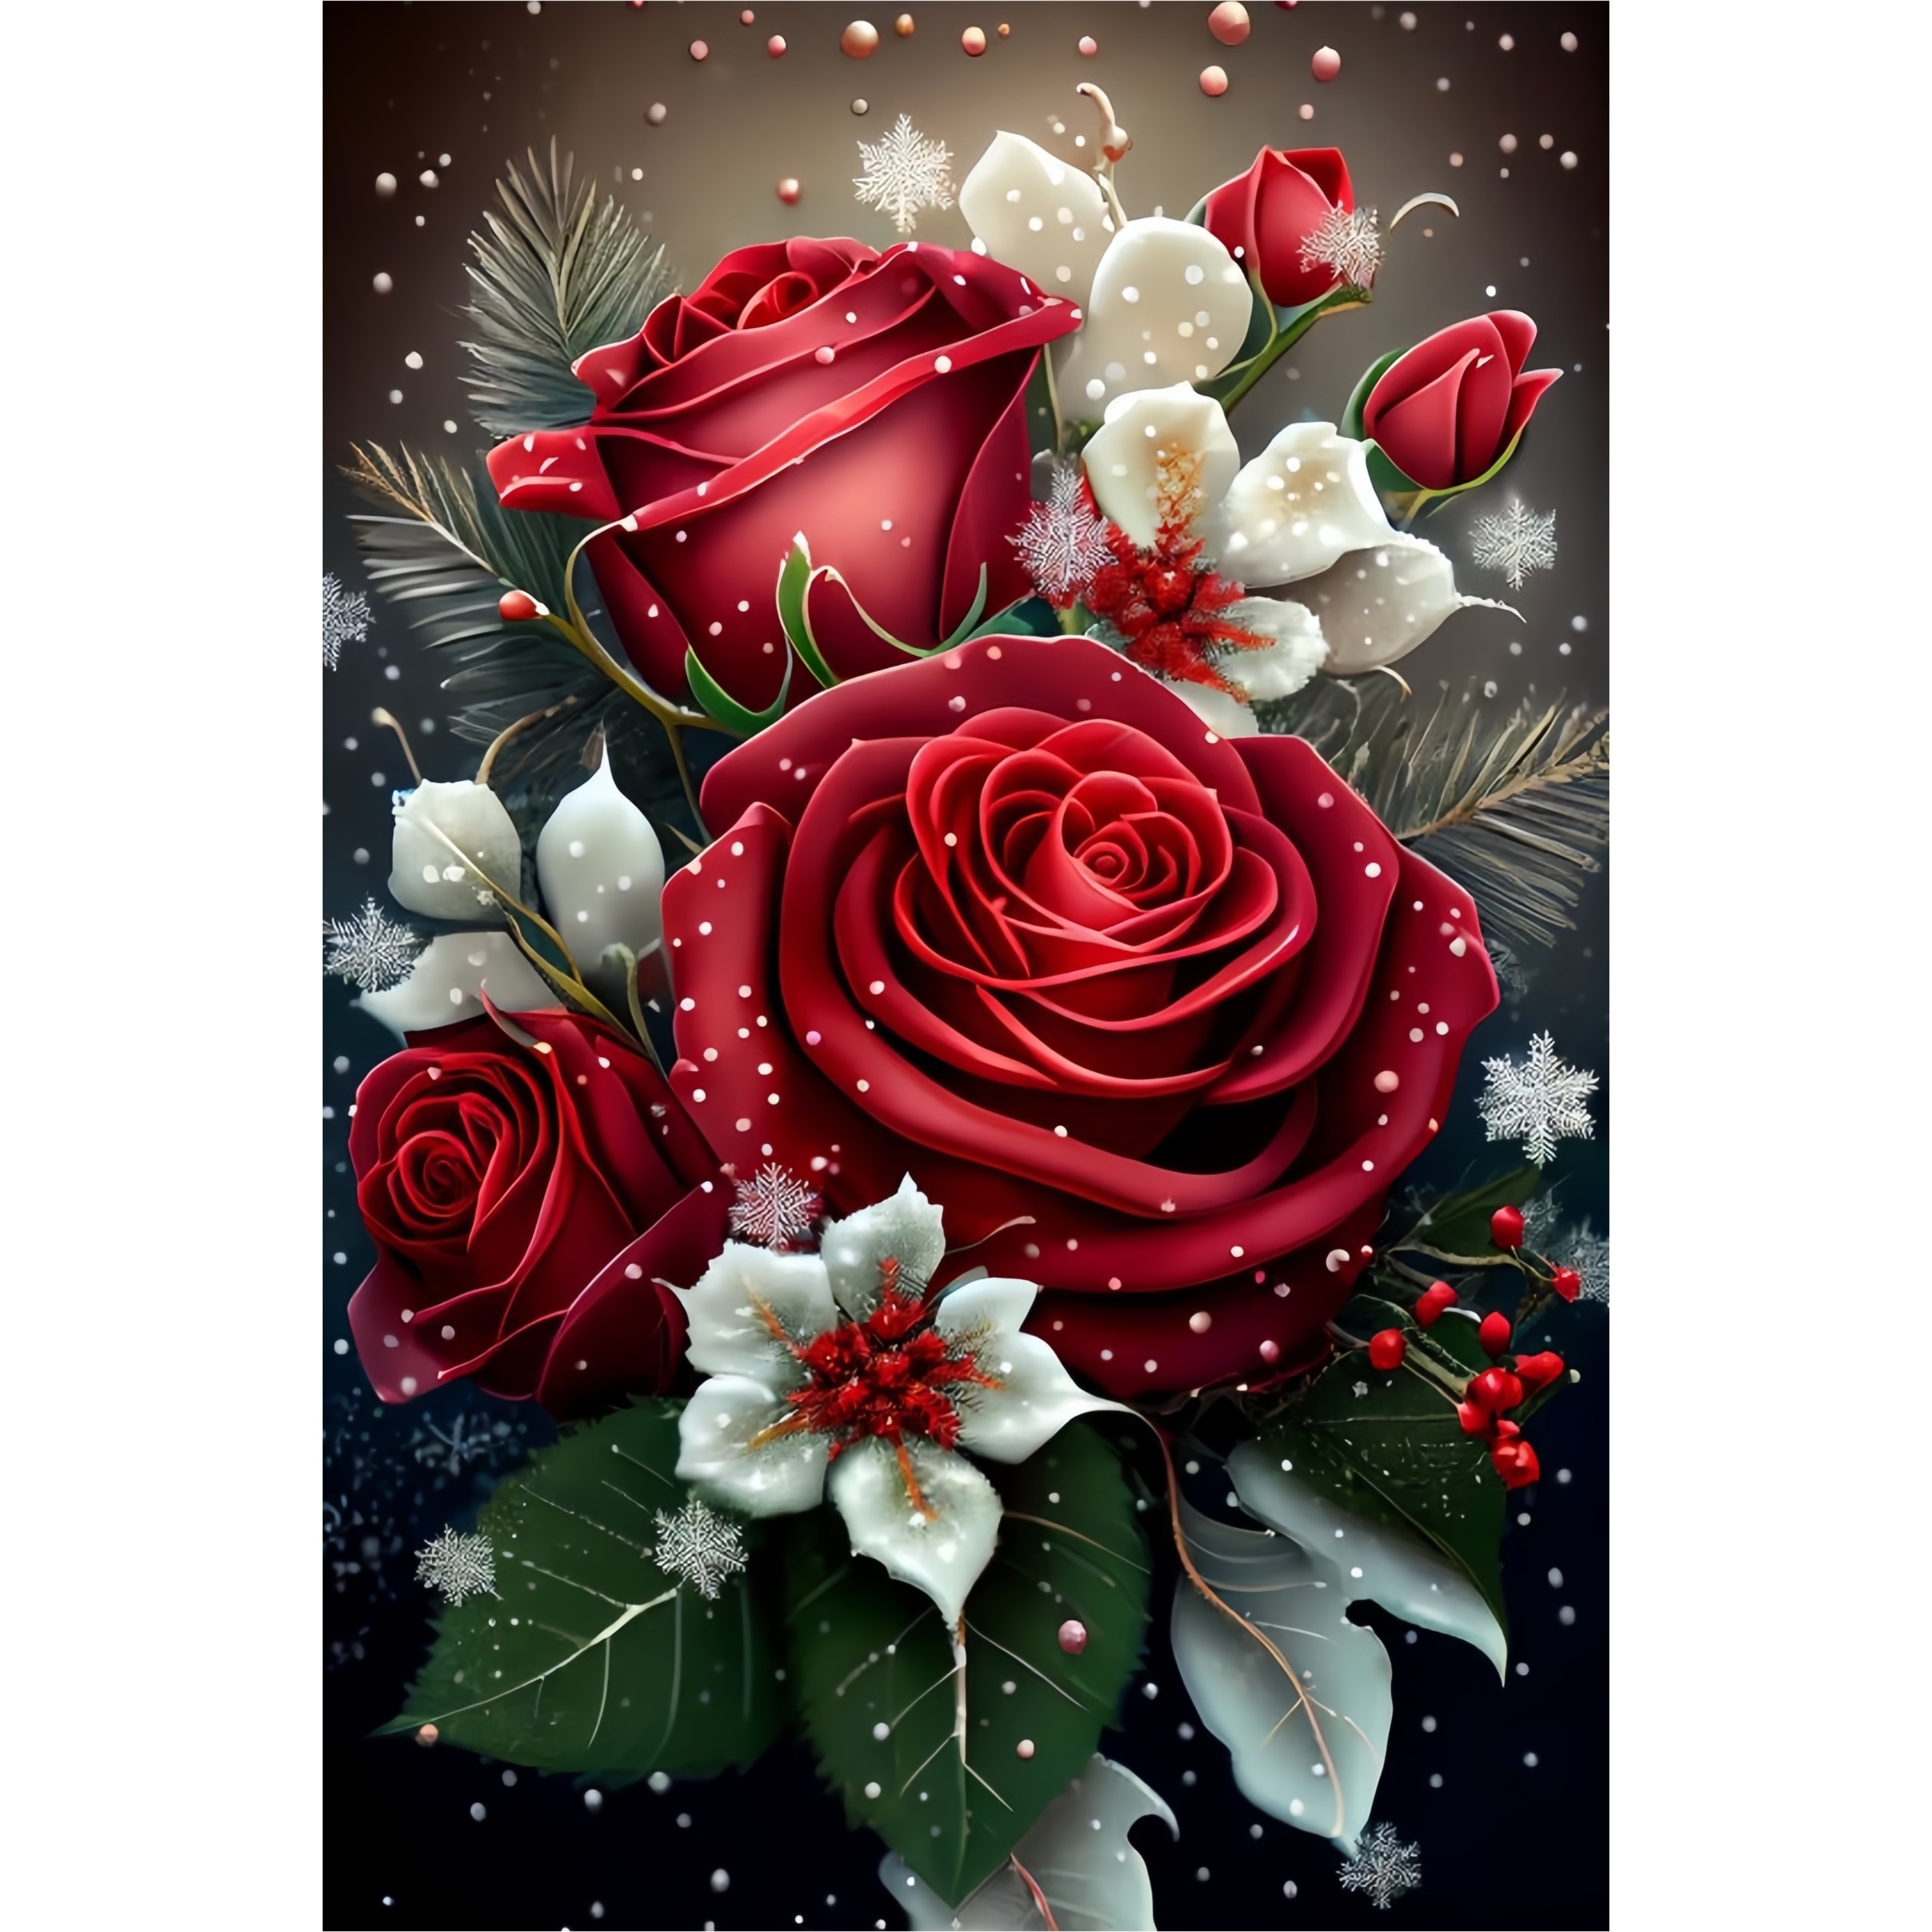 

Floral Diamond Painting Kit: Create A Stunning Rose Bouquet With 7.87x11.81inch Canvas And Round Diamond Beads - Perfect For Home Decor